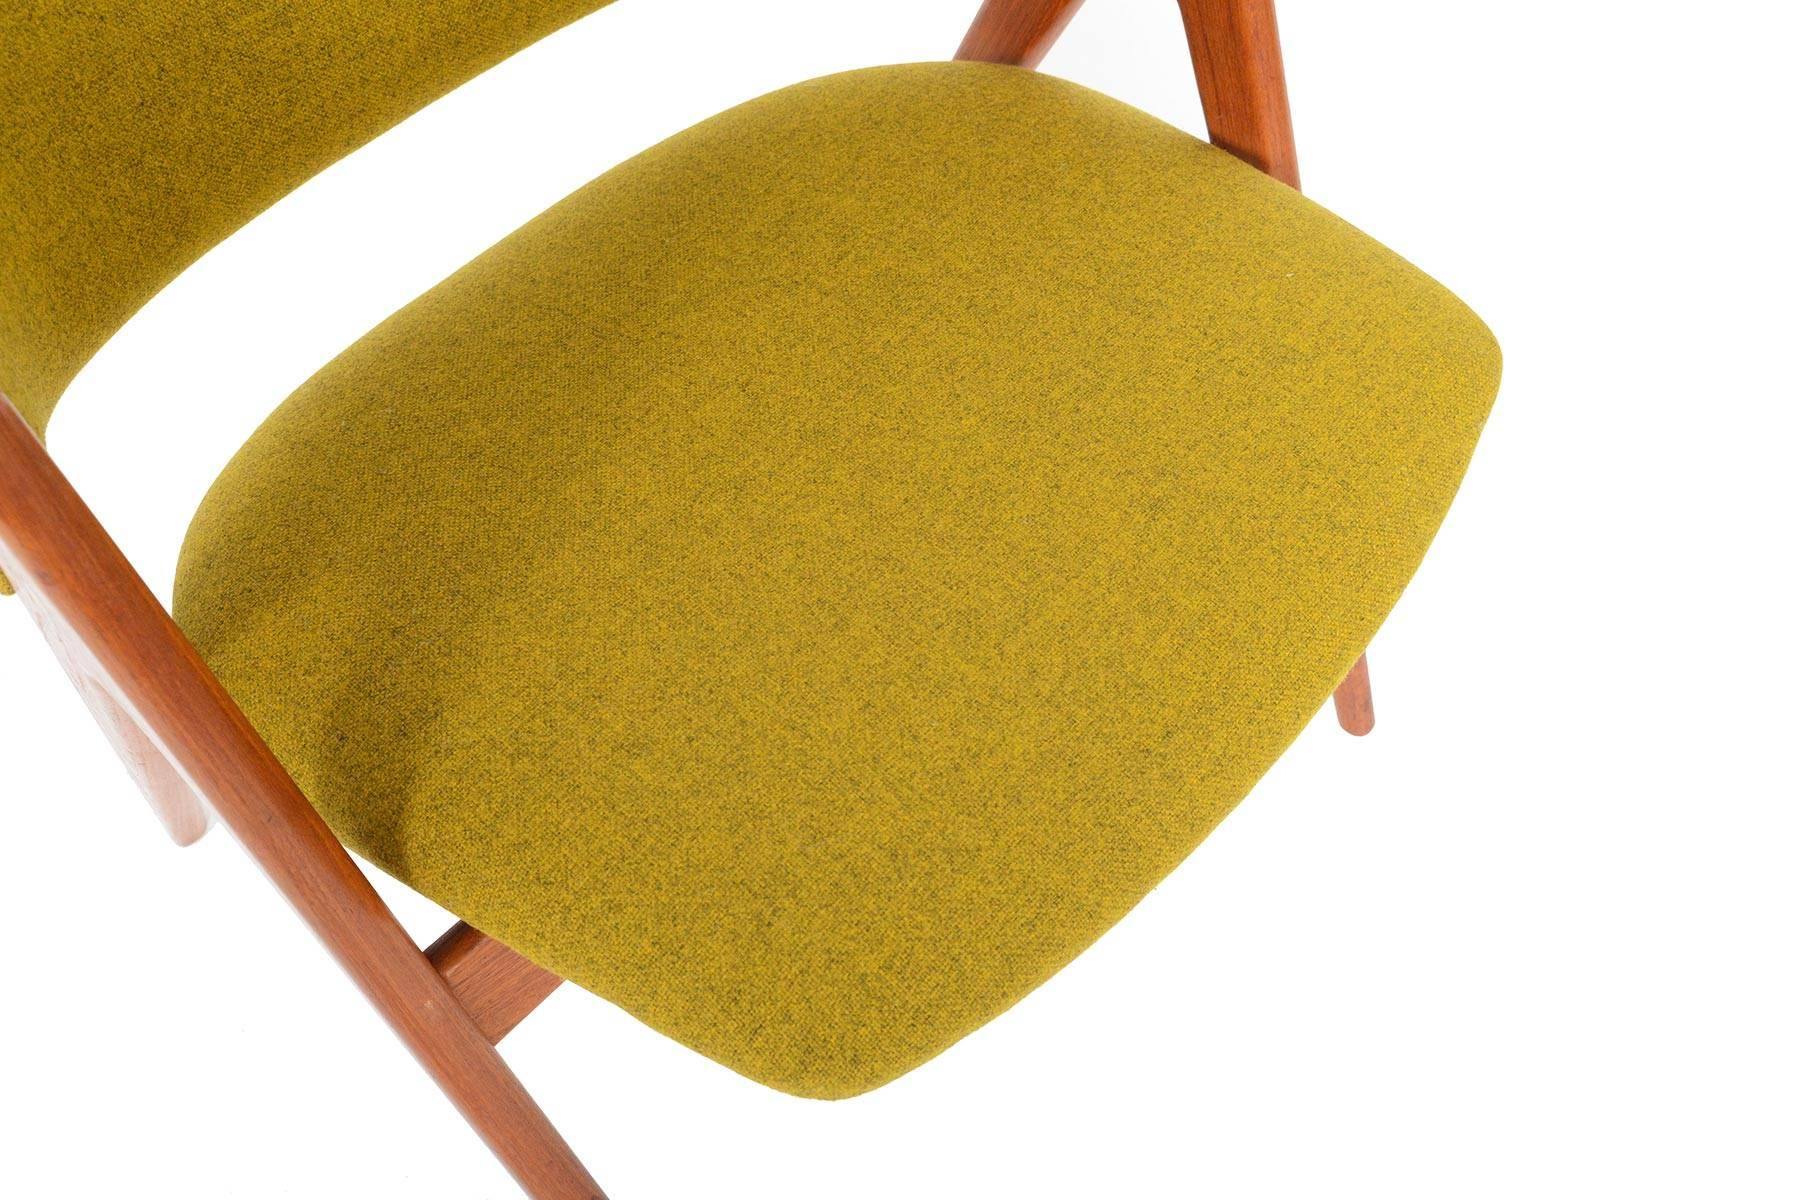 This Swedish modern lounge chair was designed by Bengt Ruda for Ikea in 1961. Designed as the 